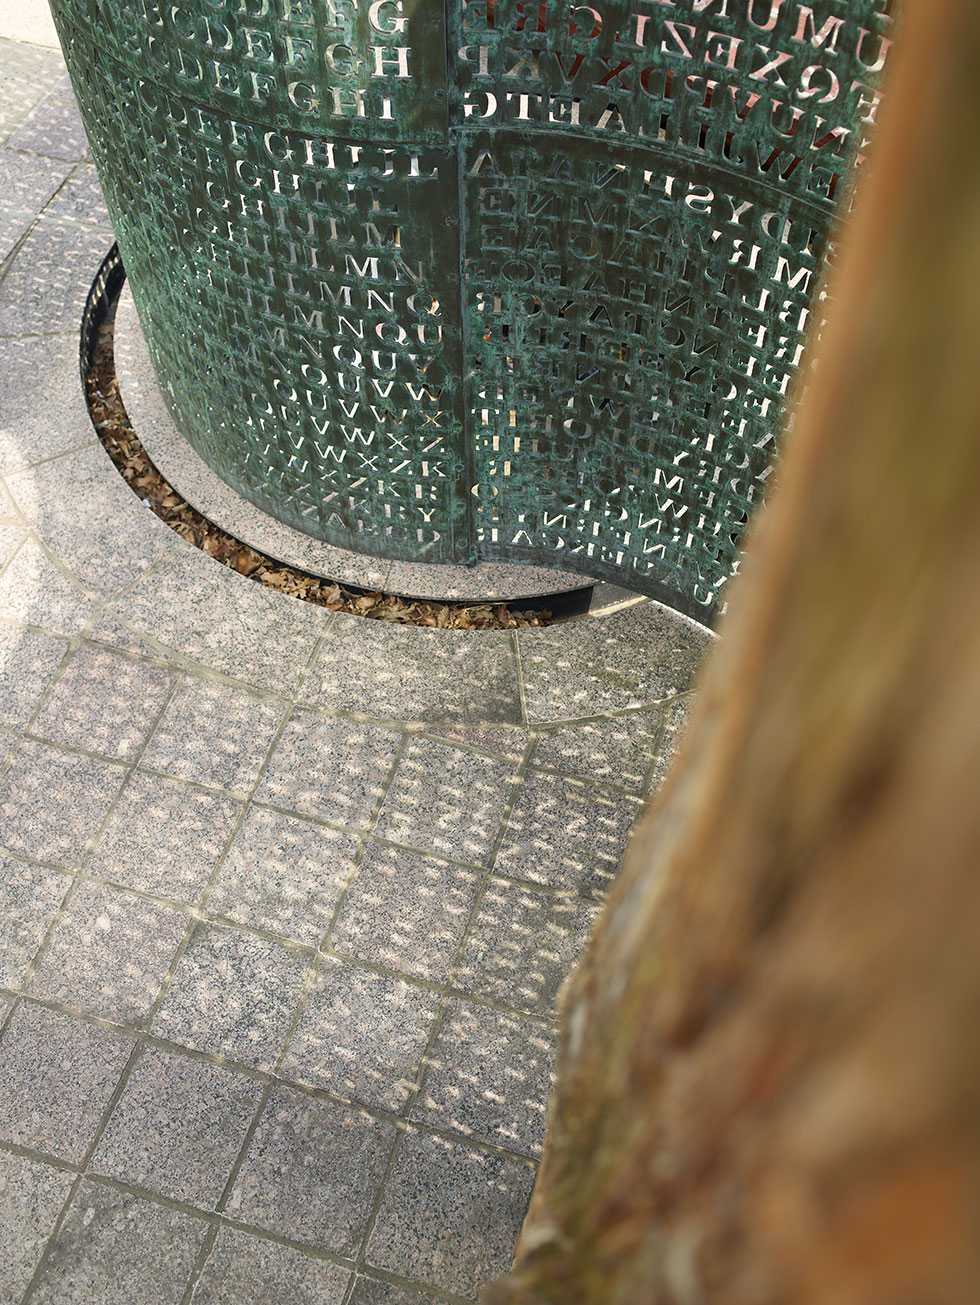 A shot looking downward at the base of the encircled copper screen with an indented ring in the ground collecting leaves and rainwater.